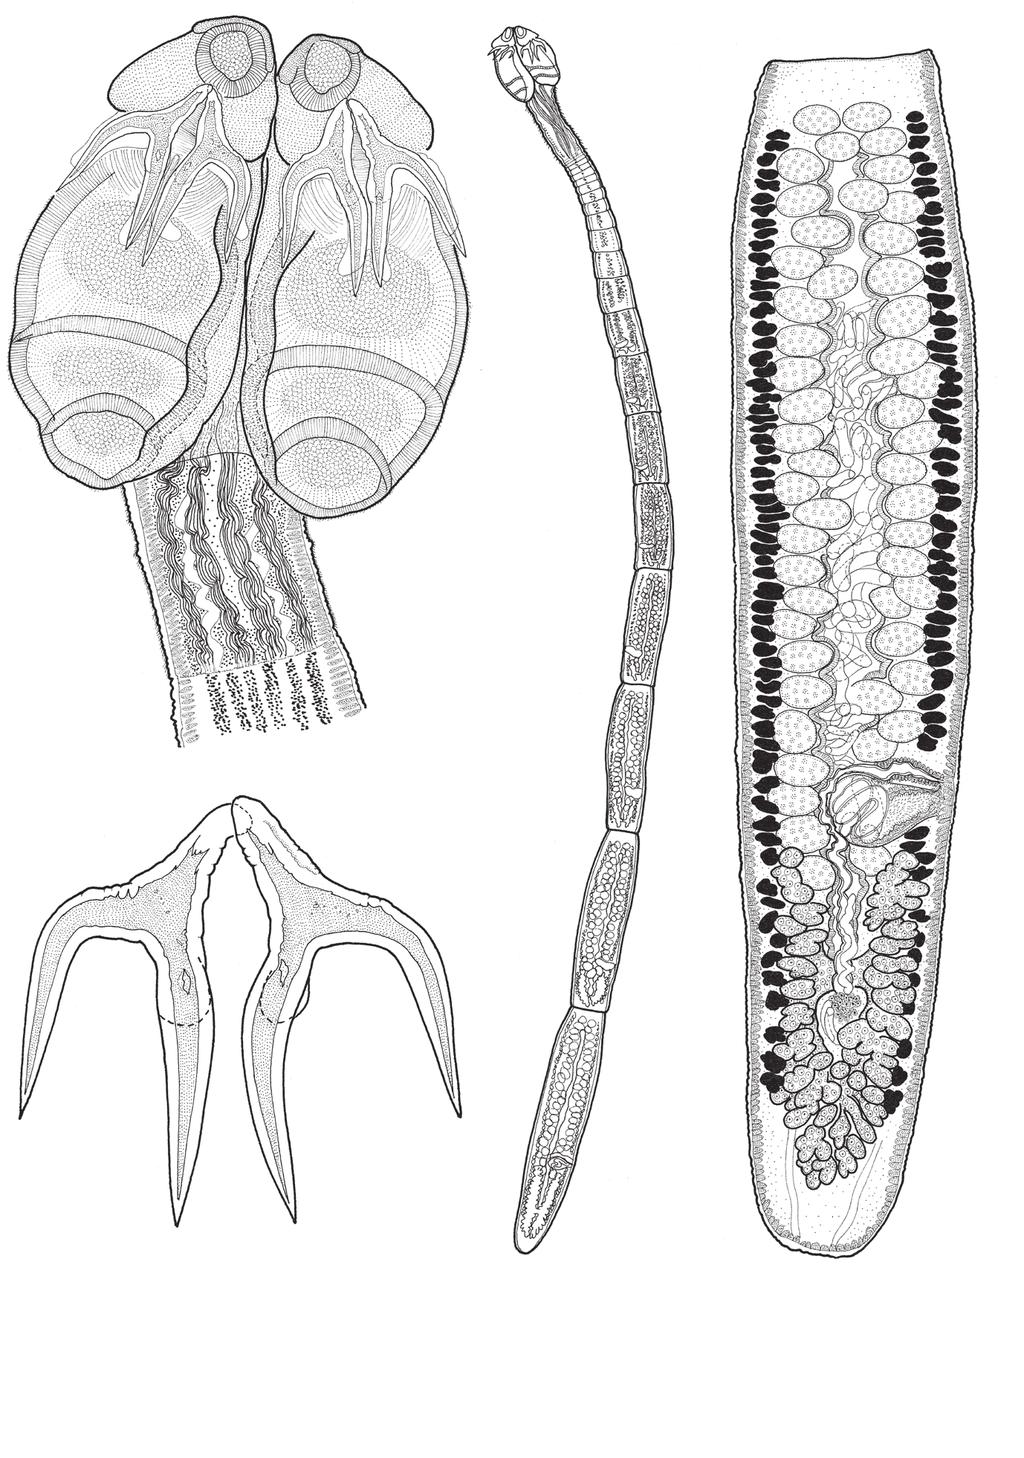 100 µm 23 55 medial 50 µm lateral 24 500 µm 26 25 100 µm Figs. 23 26. Line drawings of Acanthobothrium romanowi sp. n. Fig. 23. Scolex (USNPC 101965). Fig. 24. Hooks (QM G231360).